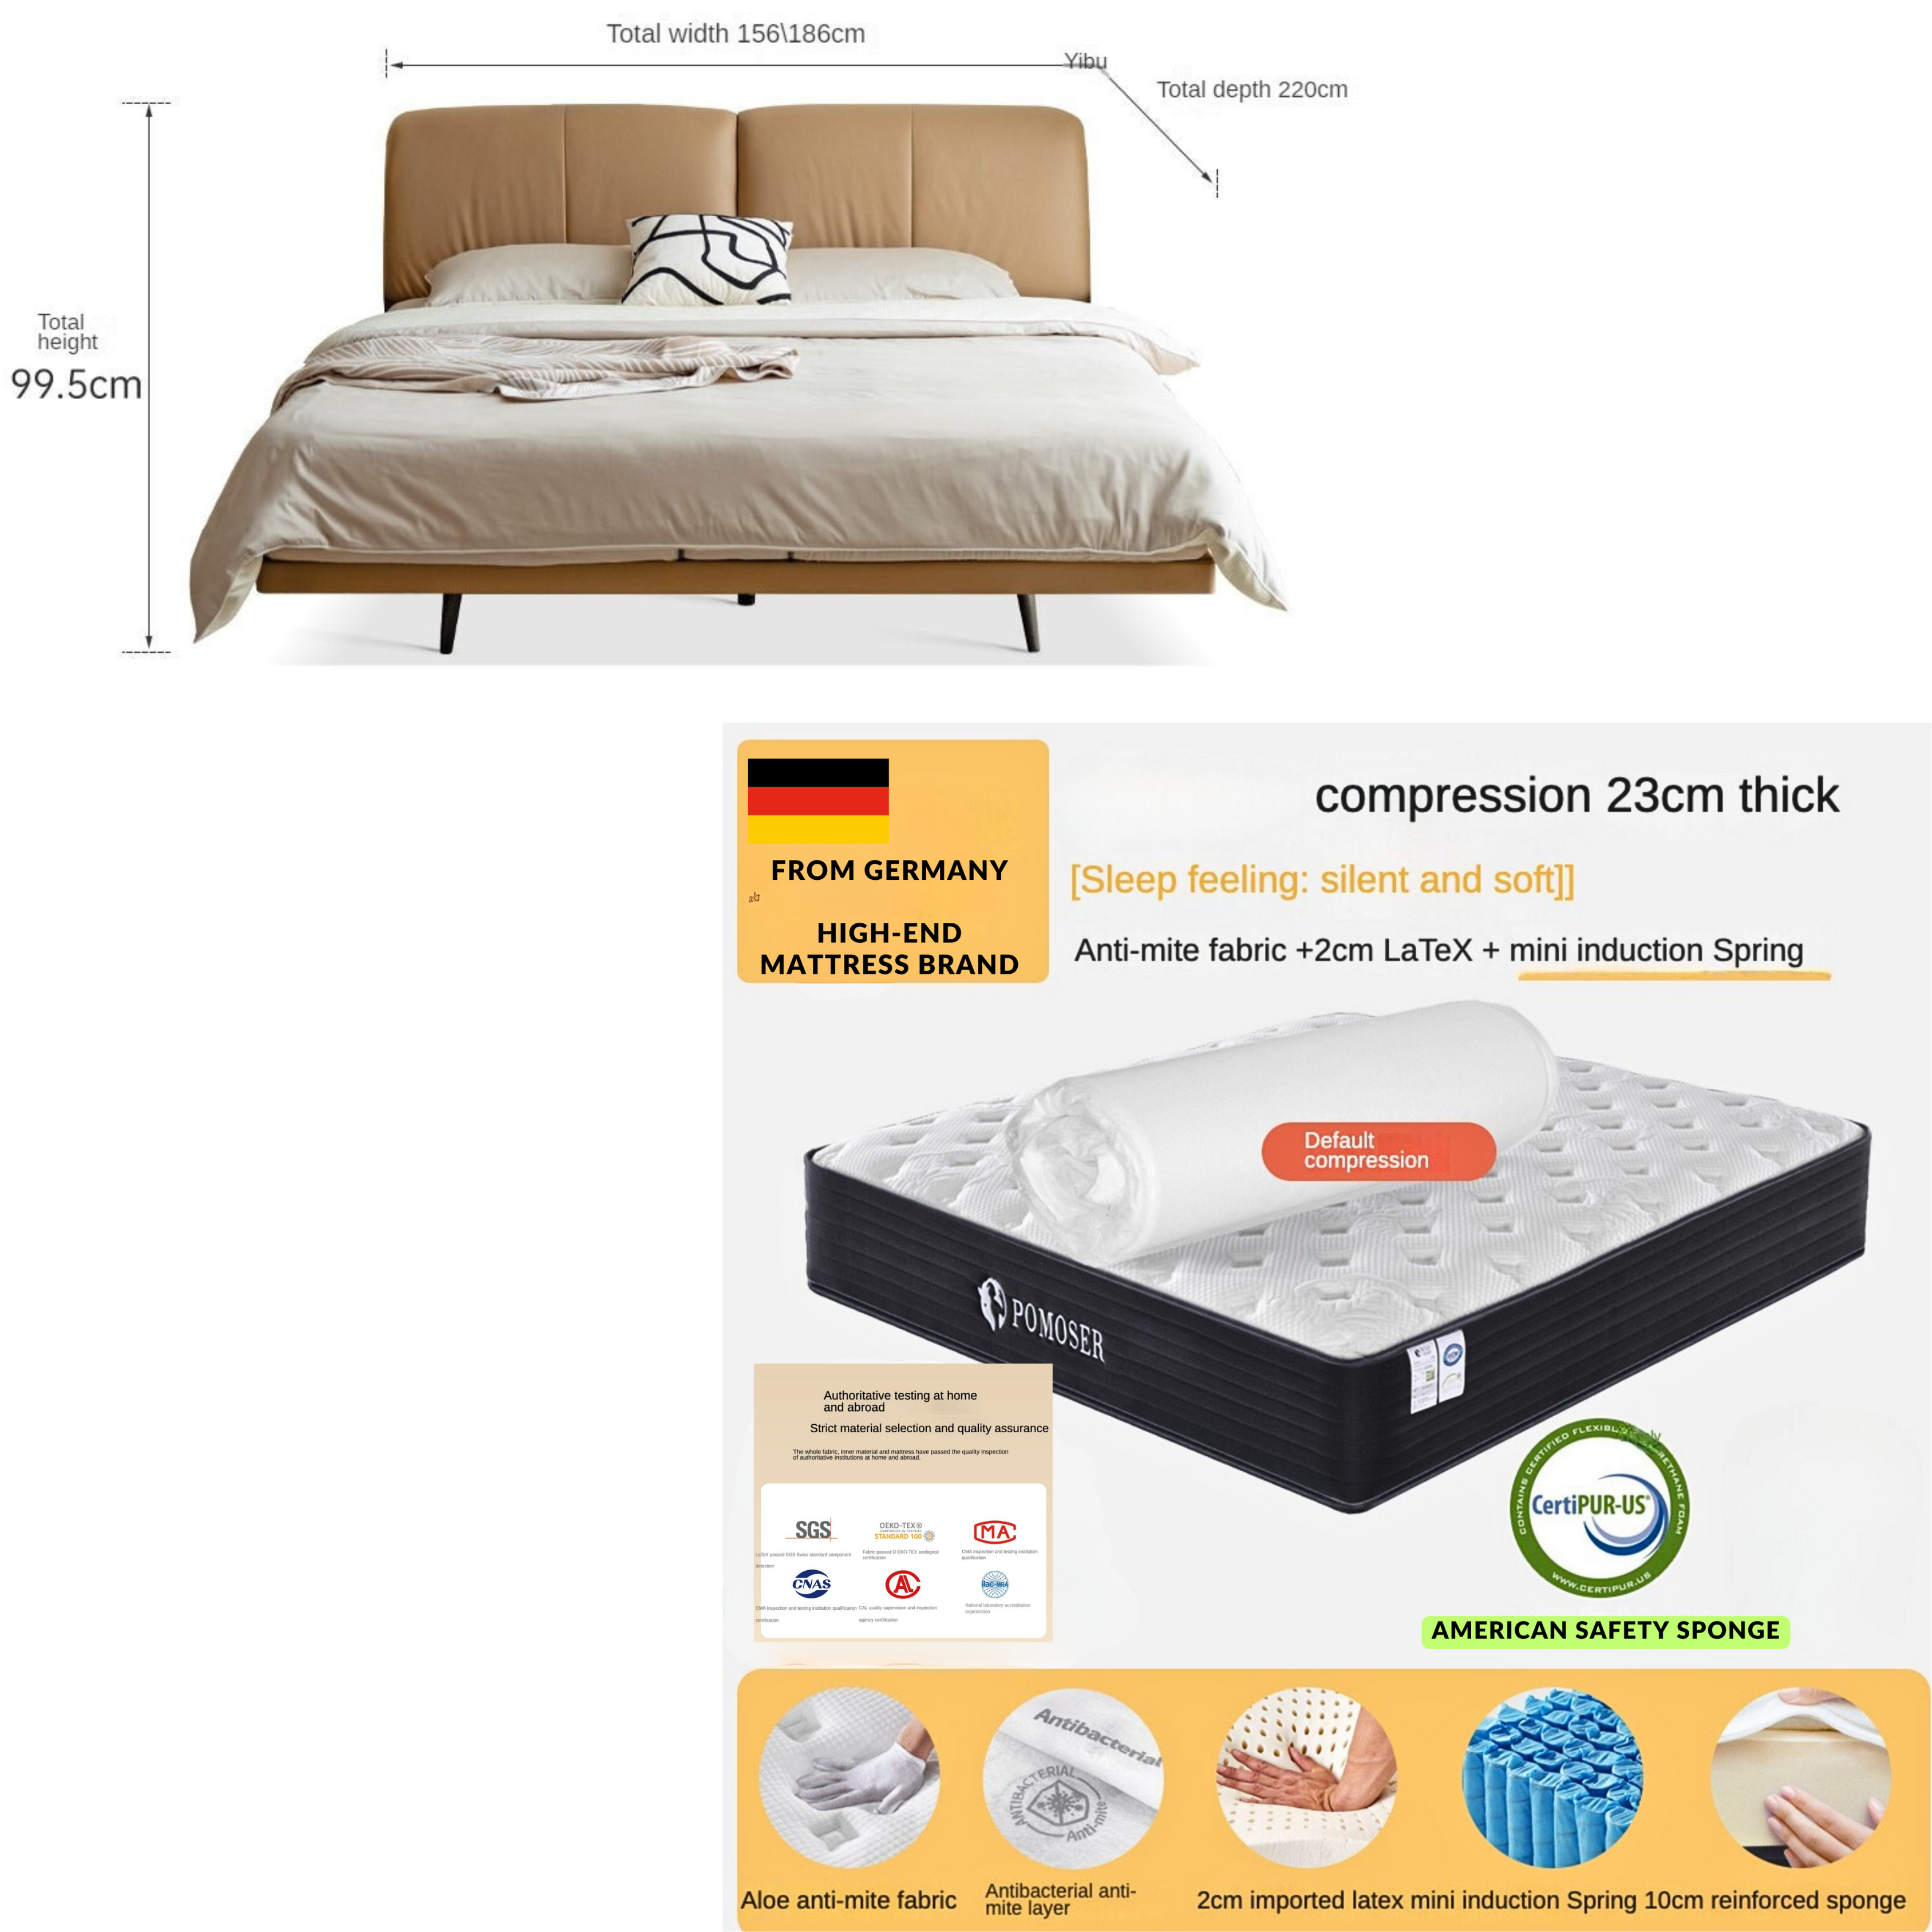 Technology Cloth Soft Light Suspension Bed "